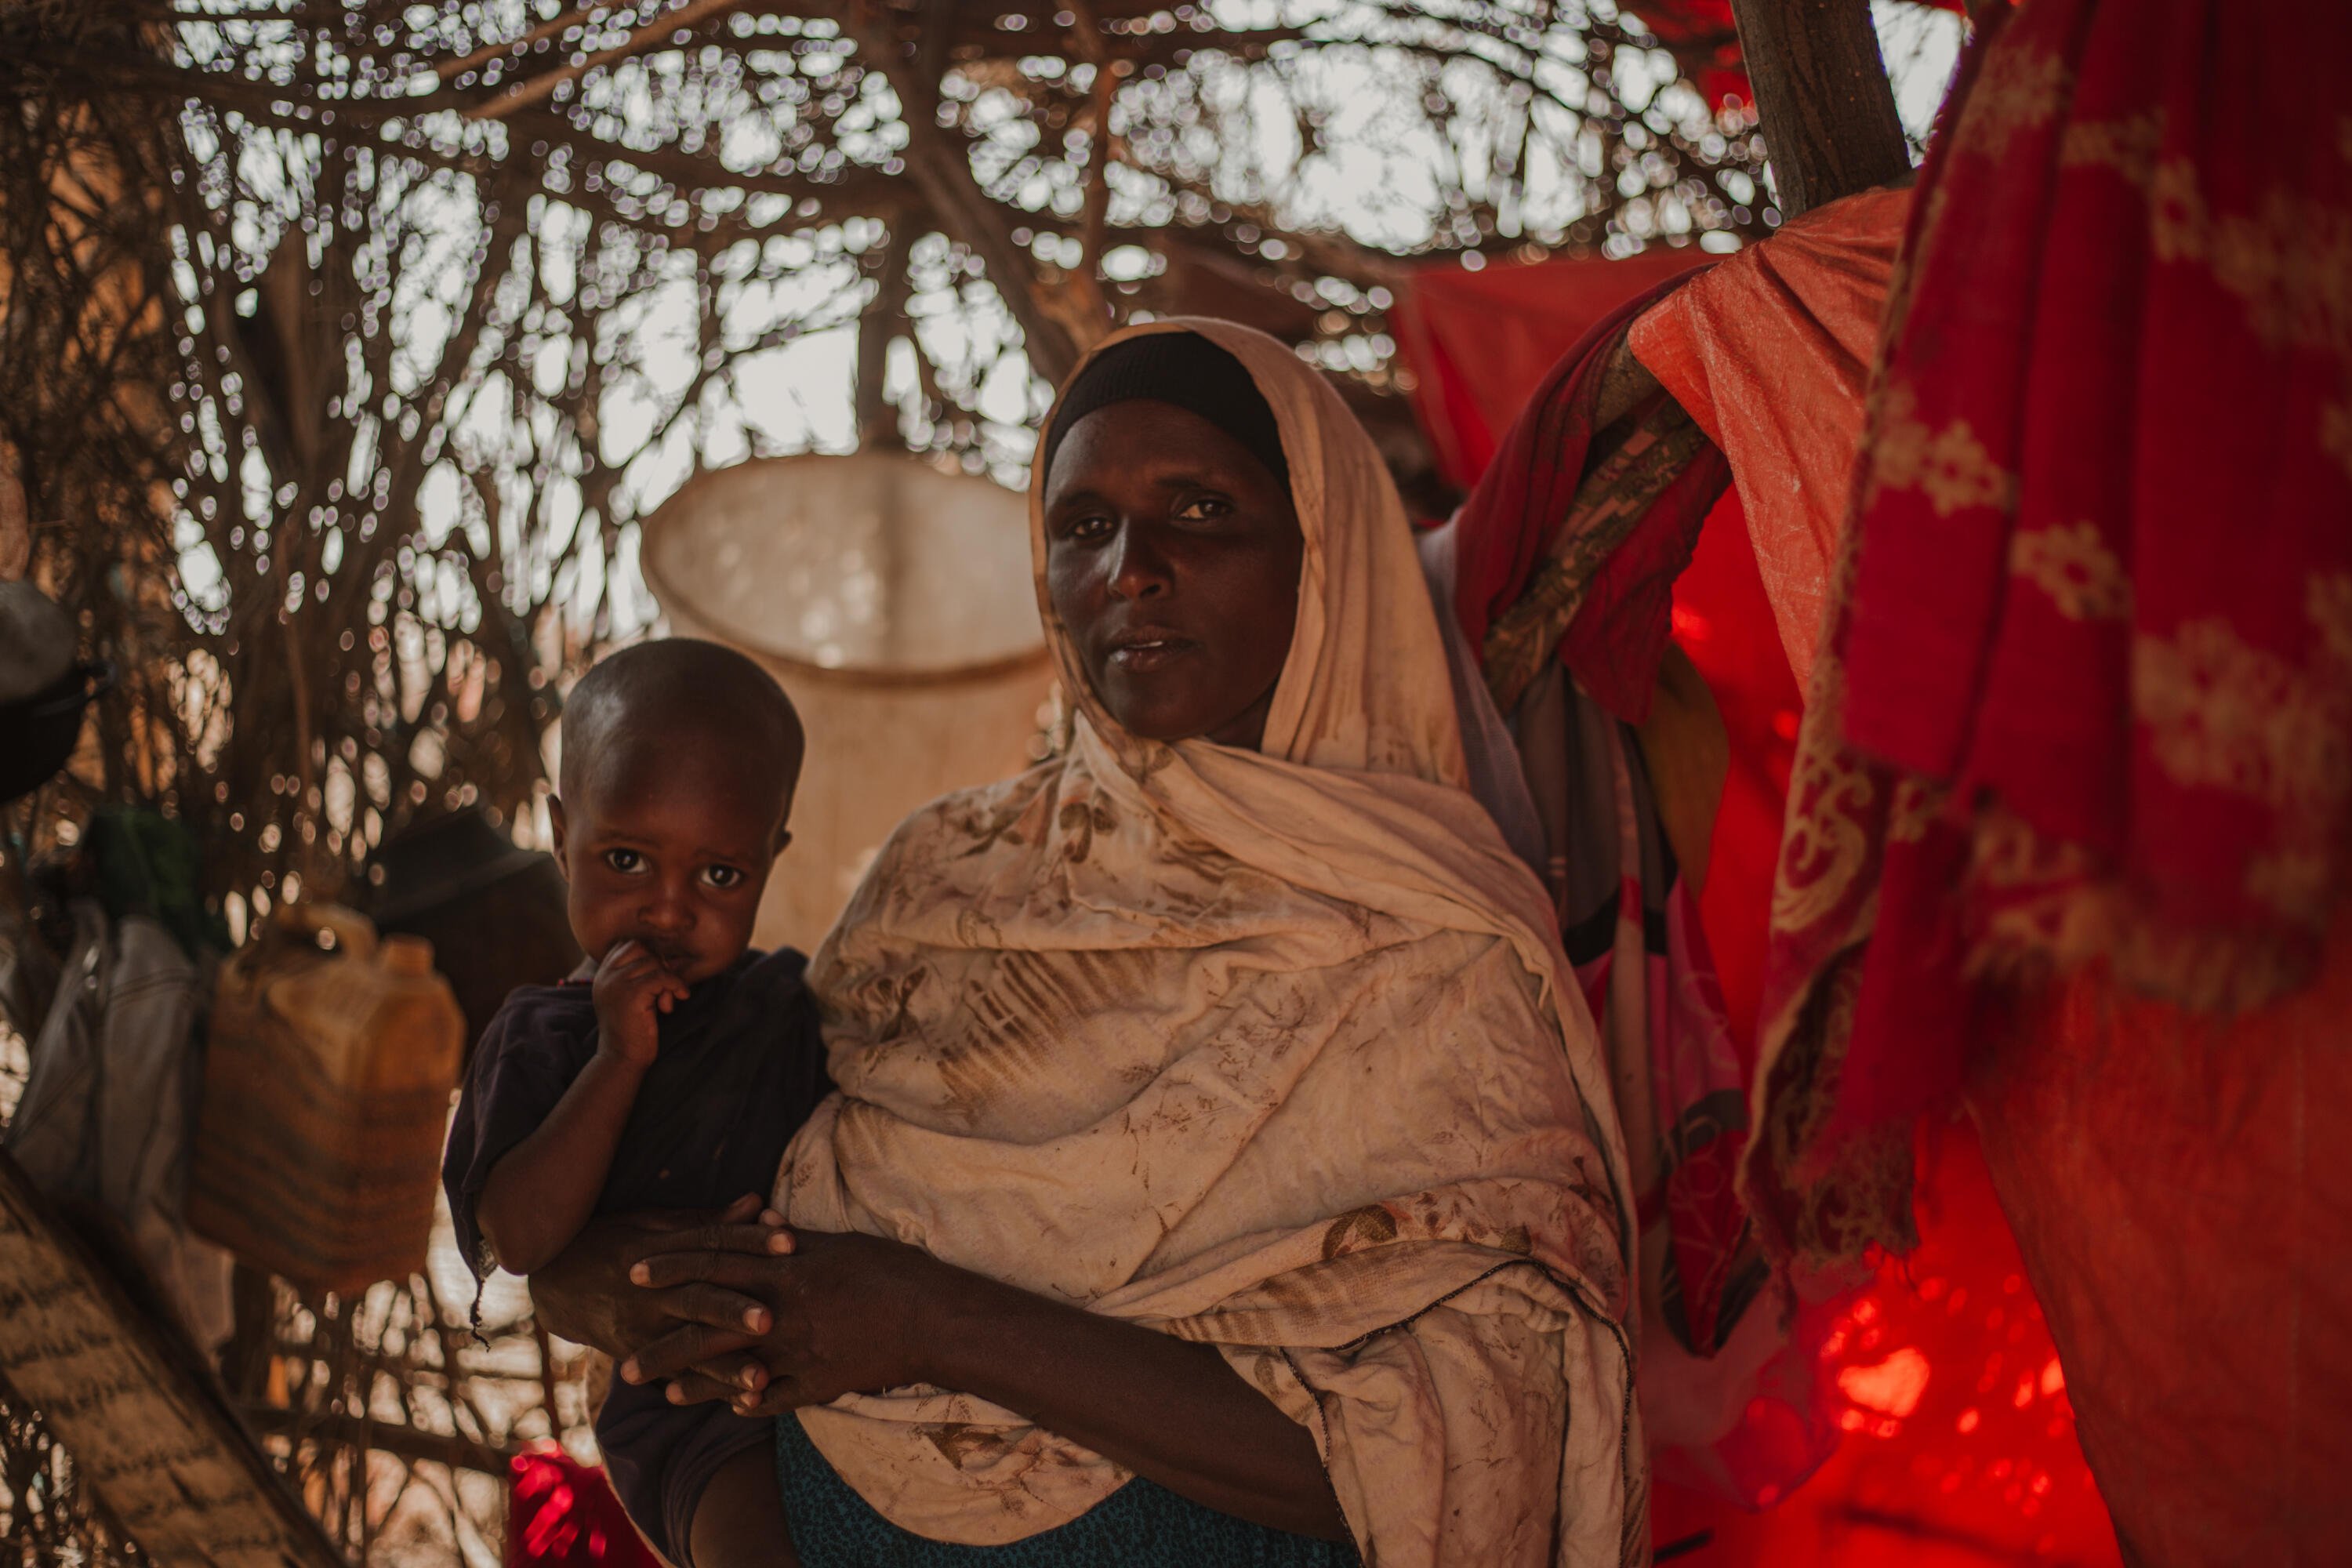 Sehiwi Kebdid, 35, and her baby Nejma Bashir live in Ethiopia's Somali region, Sehiwi says the drought has caused her to lose a lot of her livestock. 